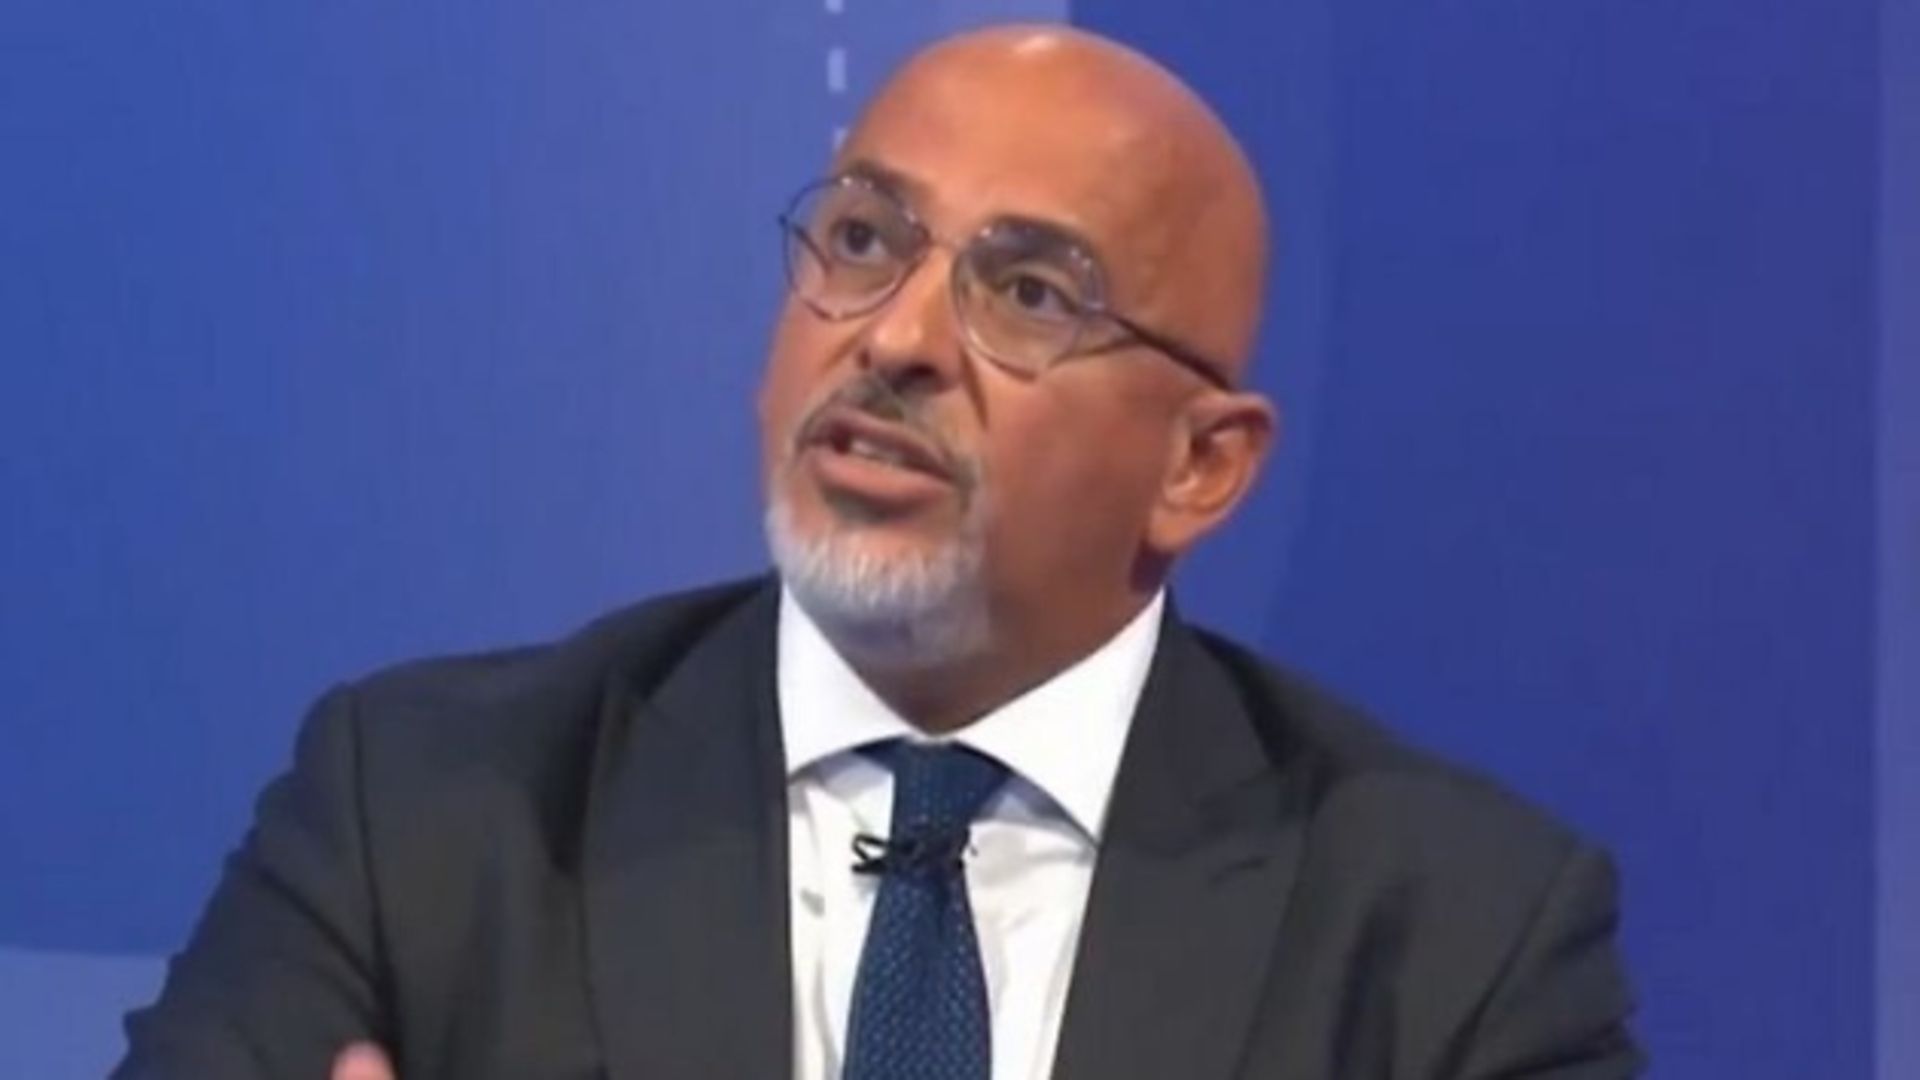 Nadim Zahawi is challenged by Fiona Bruce on Question Time. Credit: BBC.